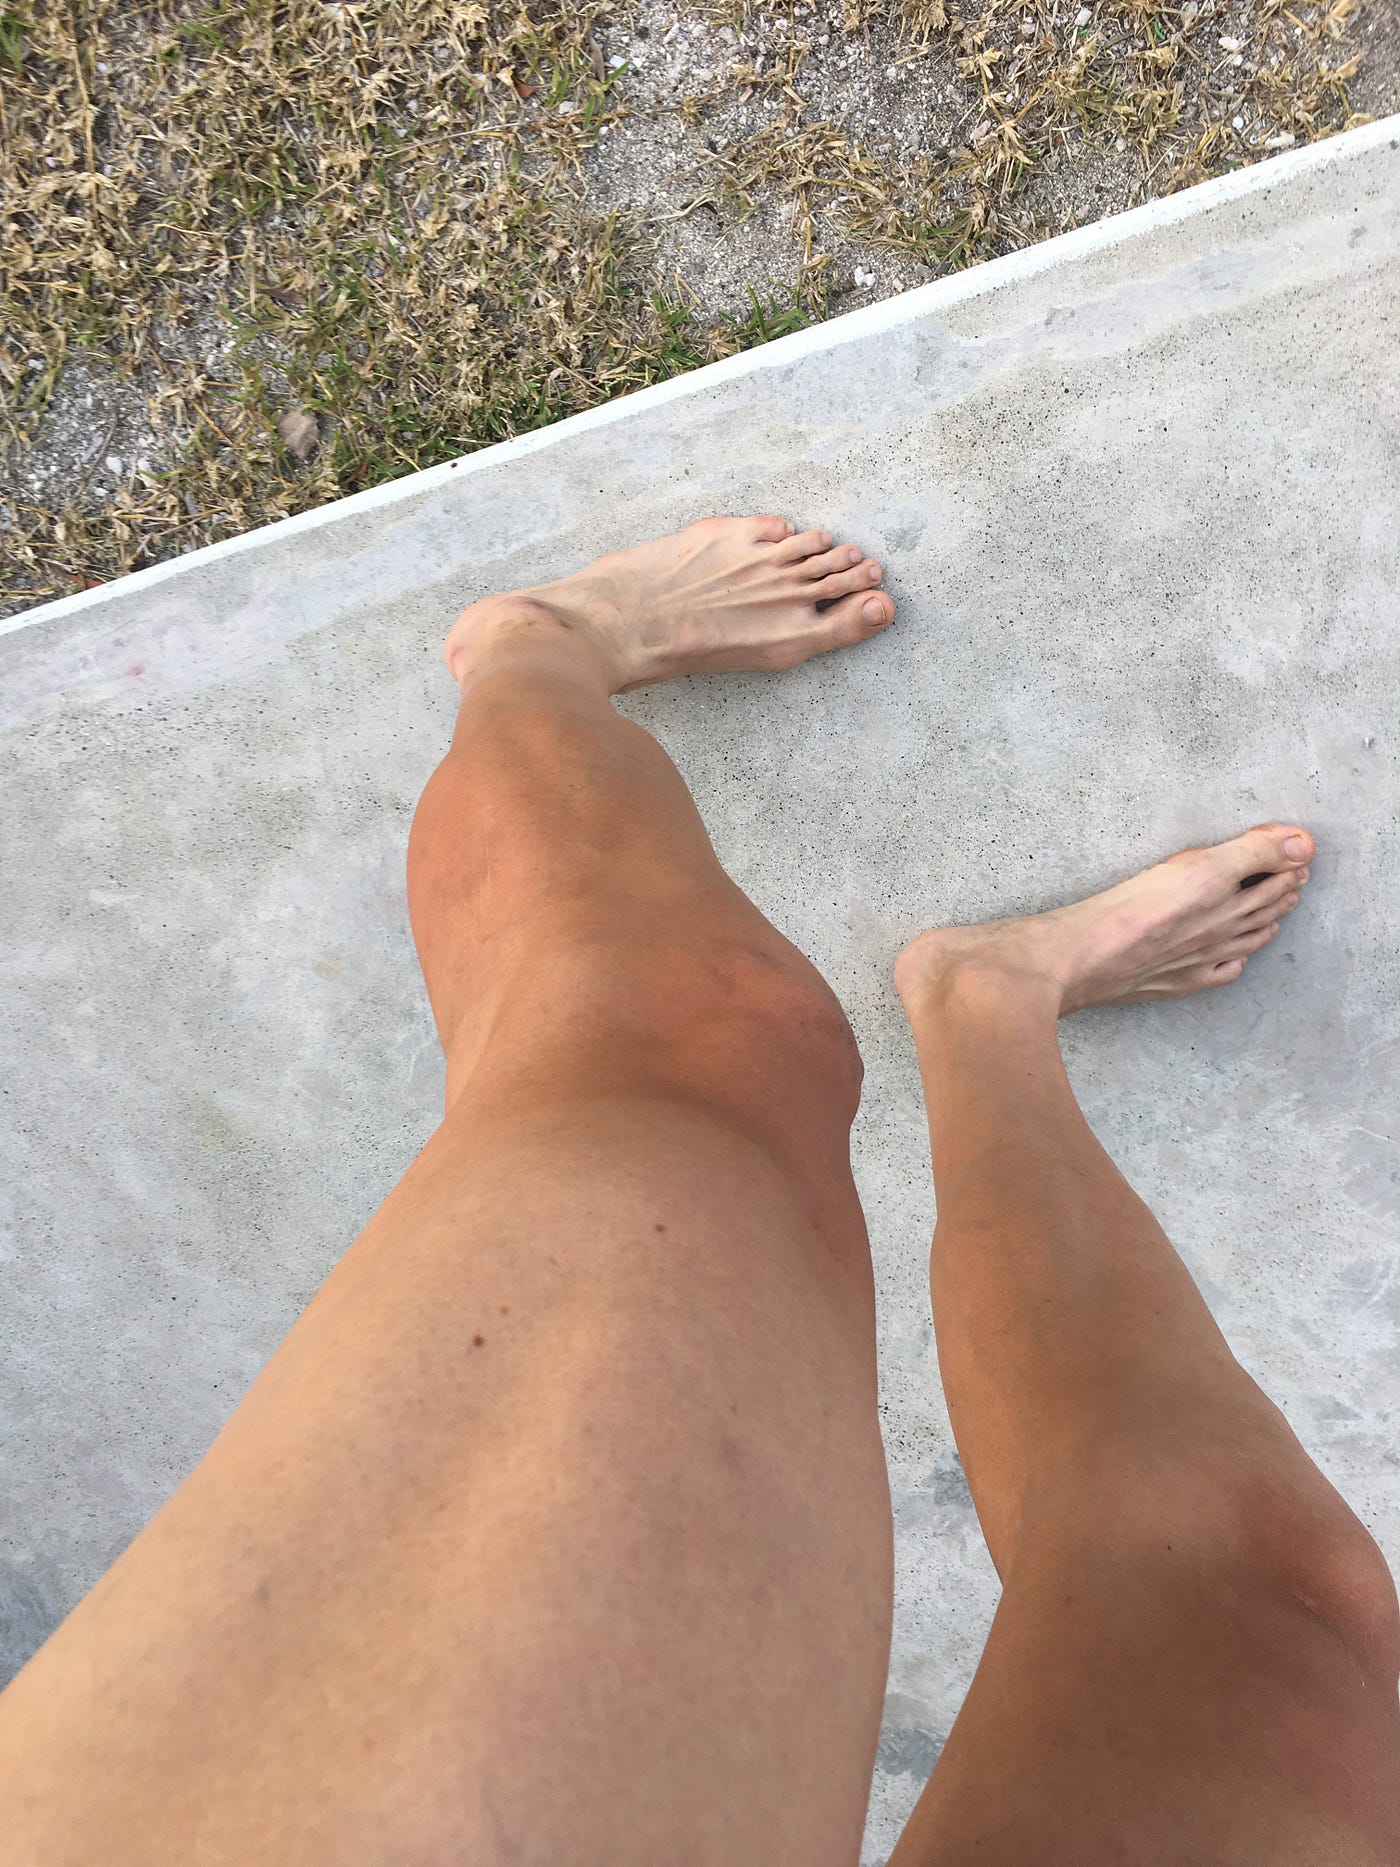 entry 11. So why do cyclists shave legs? | by The Lone Thriver | Medium